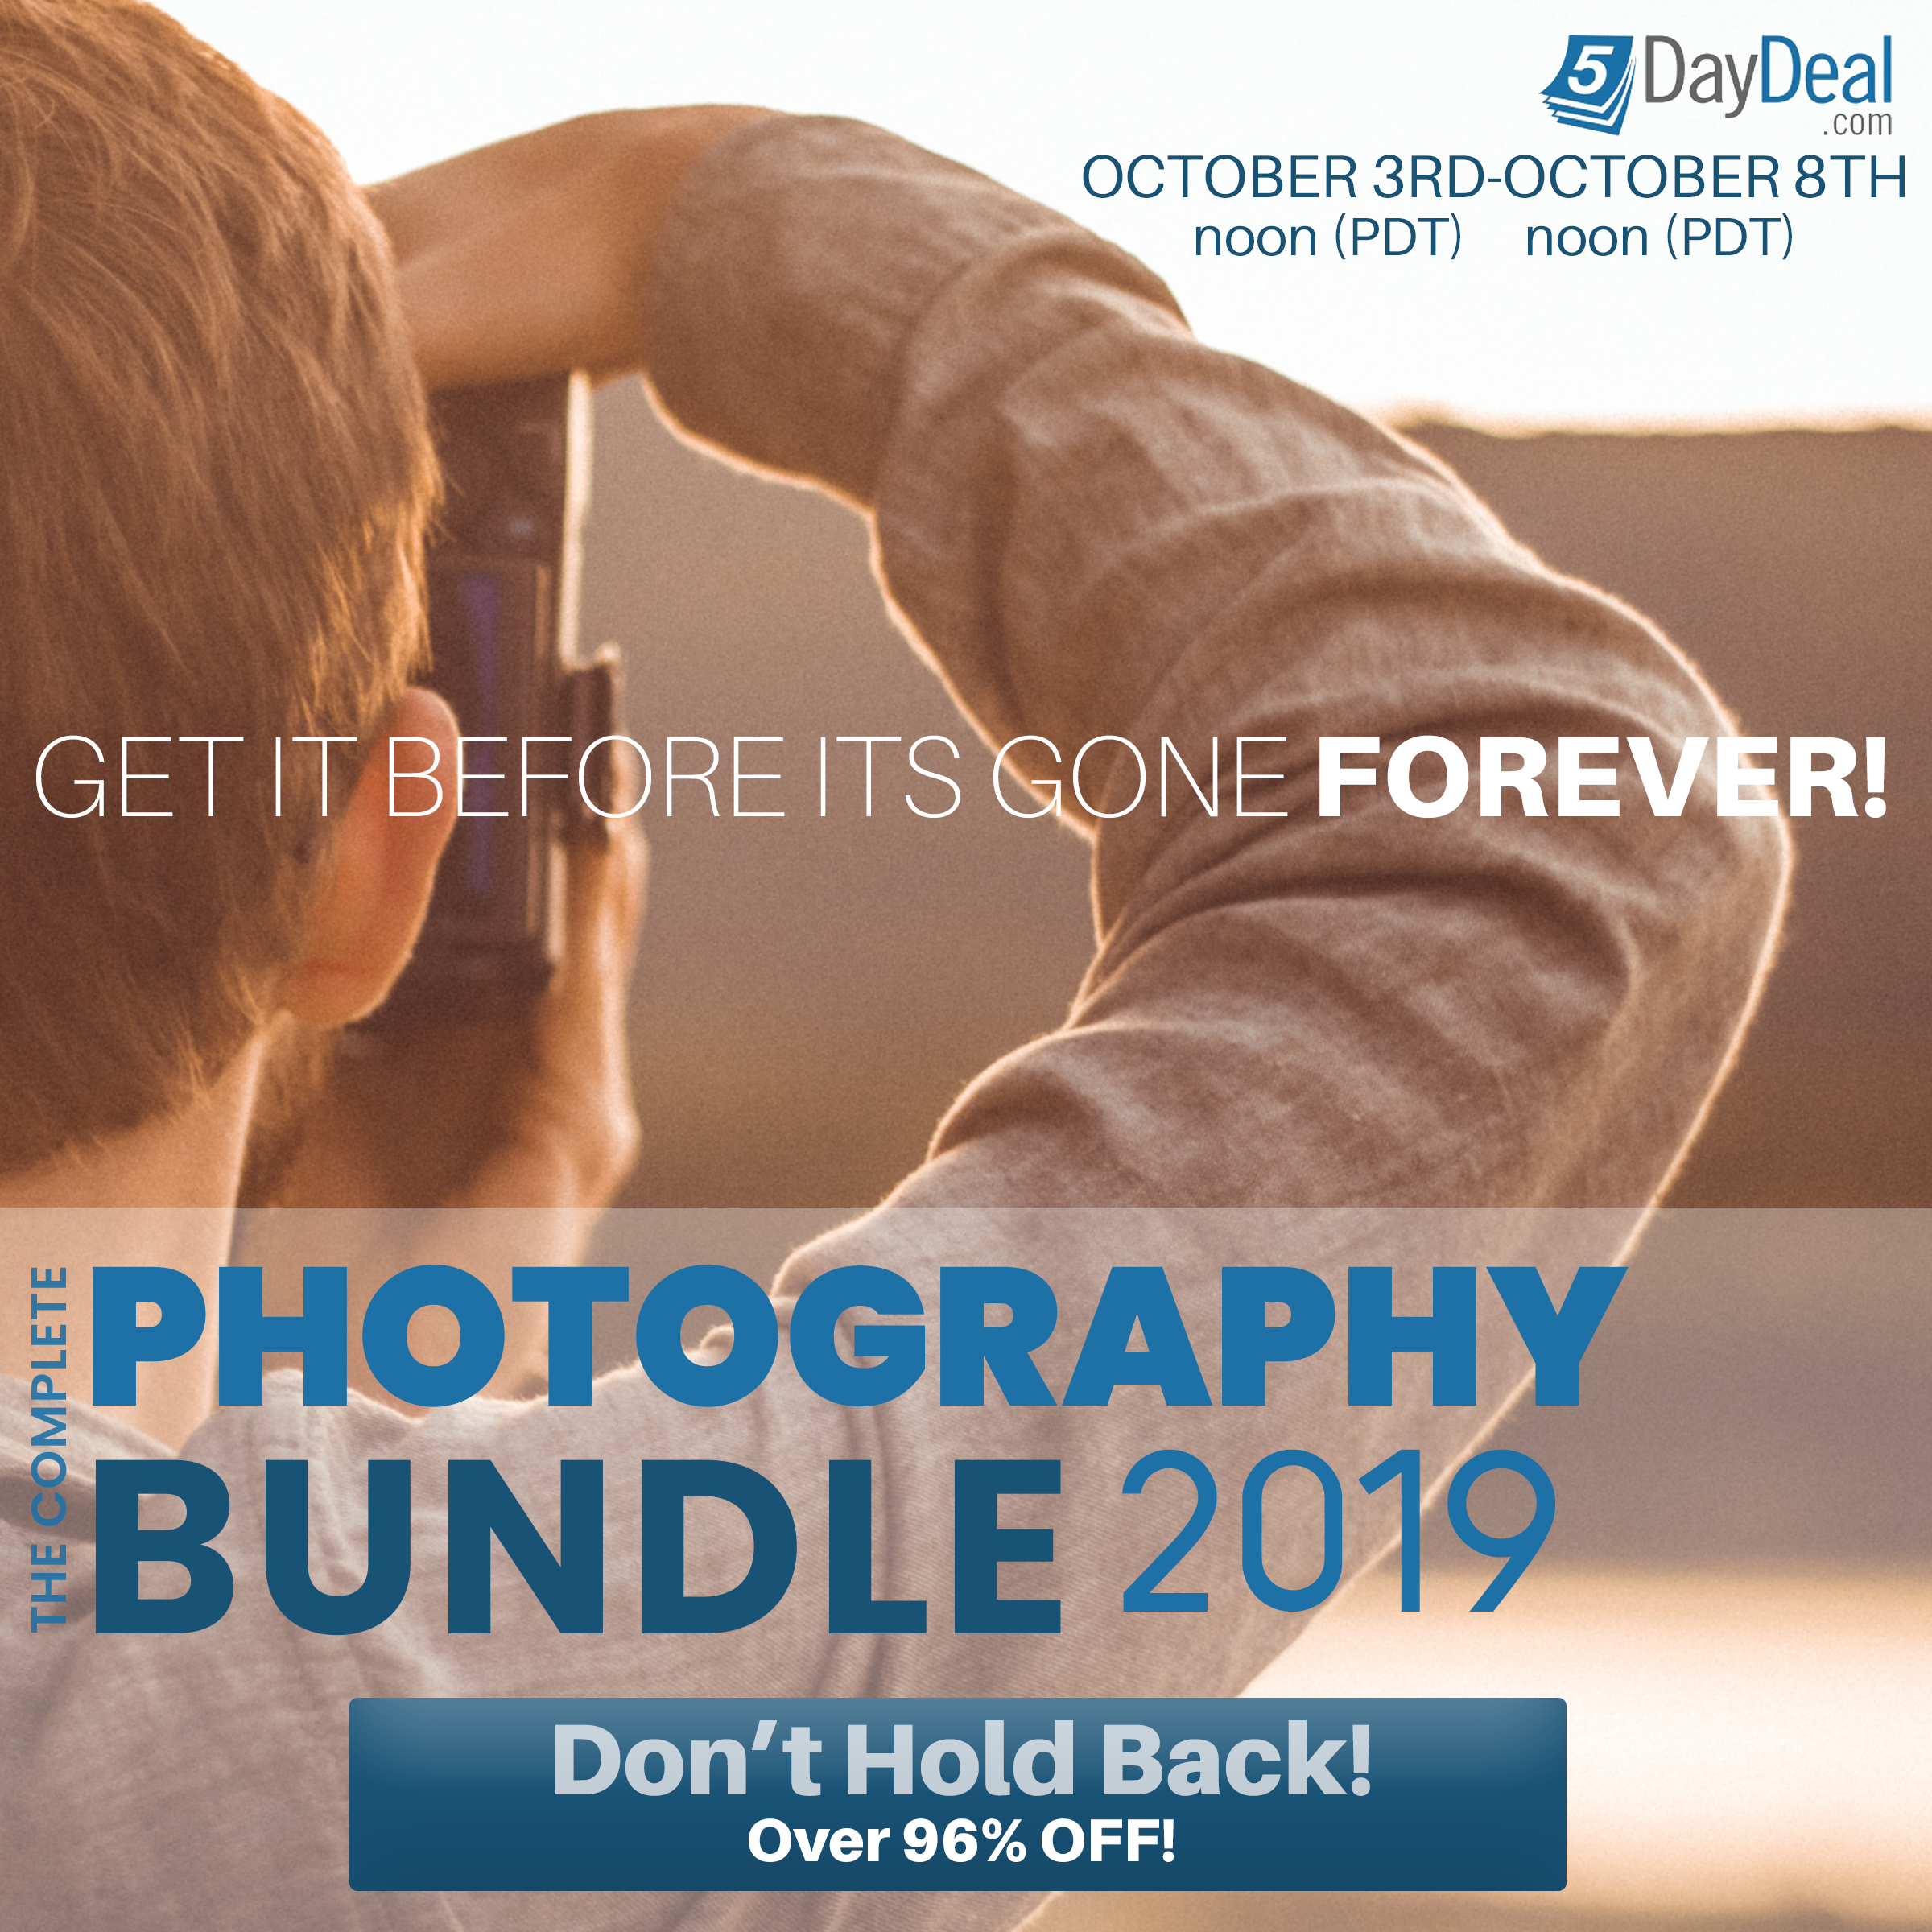 Save, Give, Learn and Create with the $89 Complete Photography Bundle